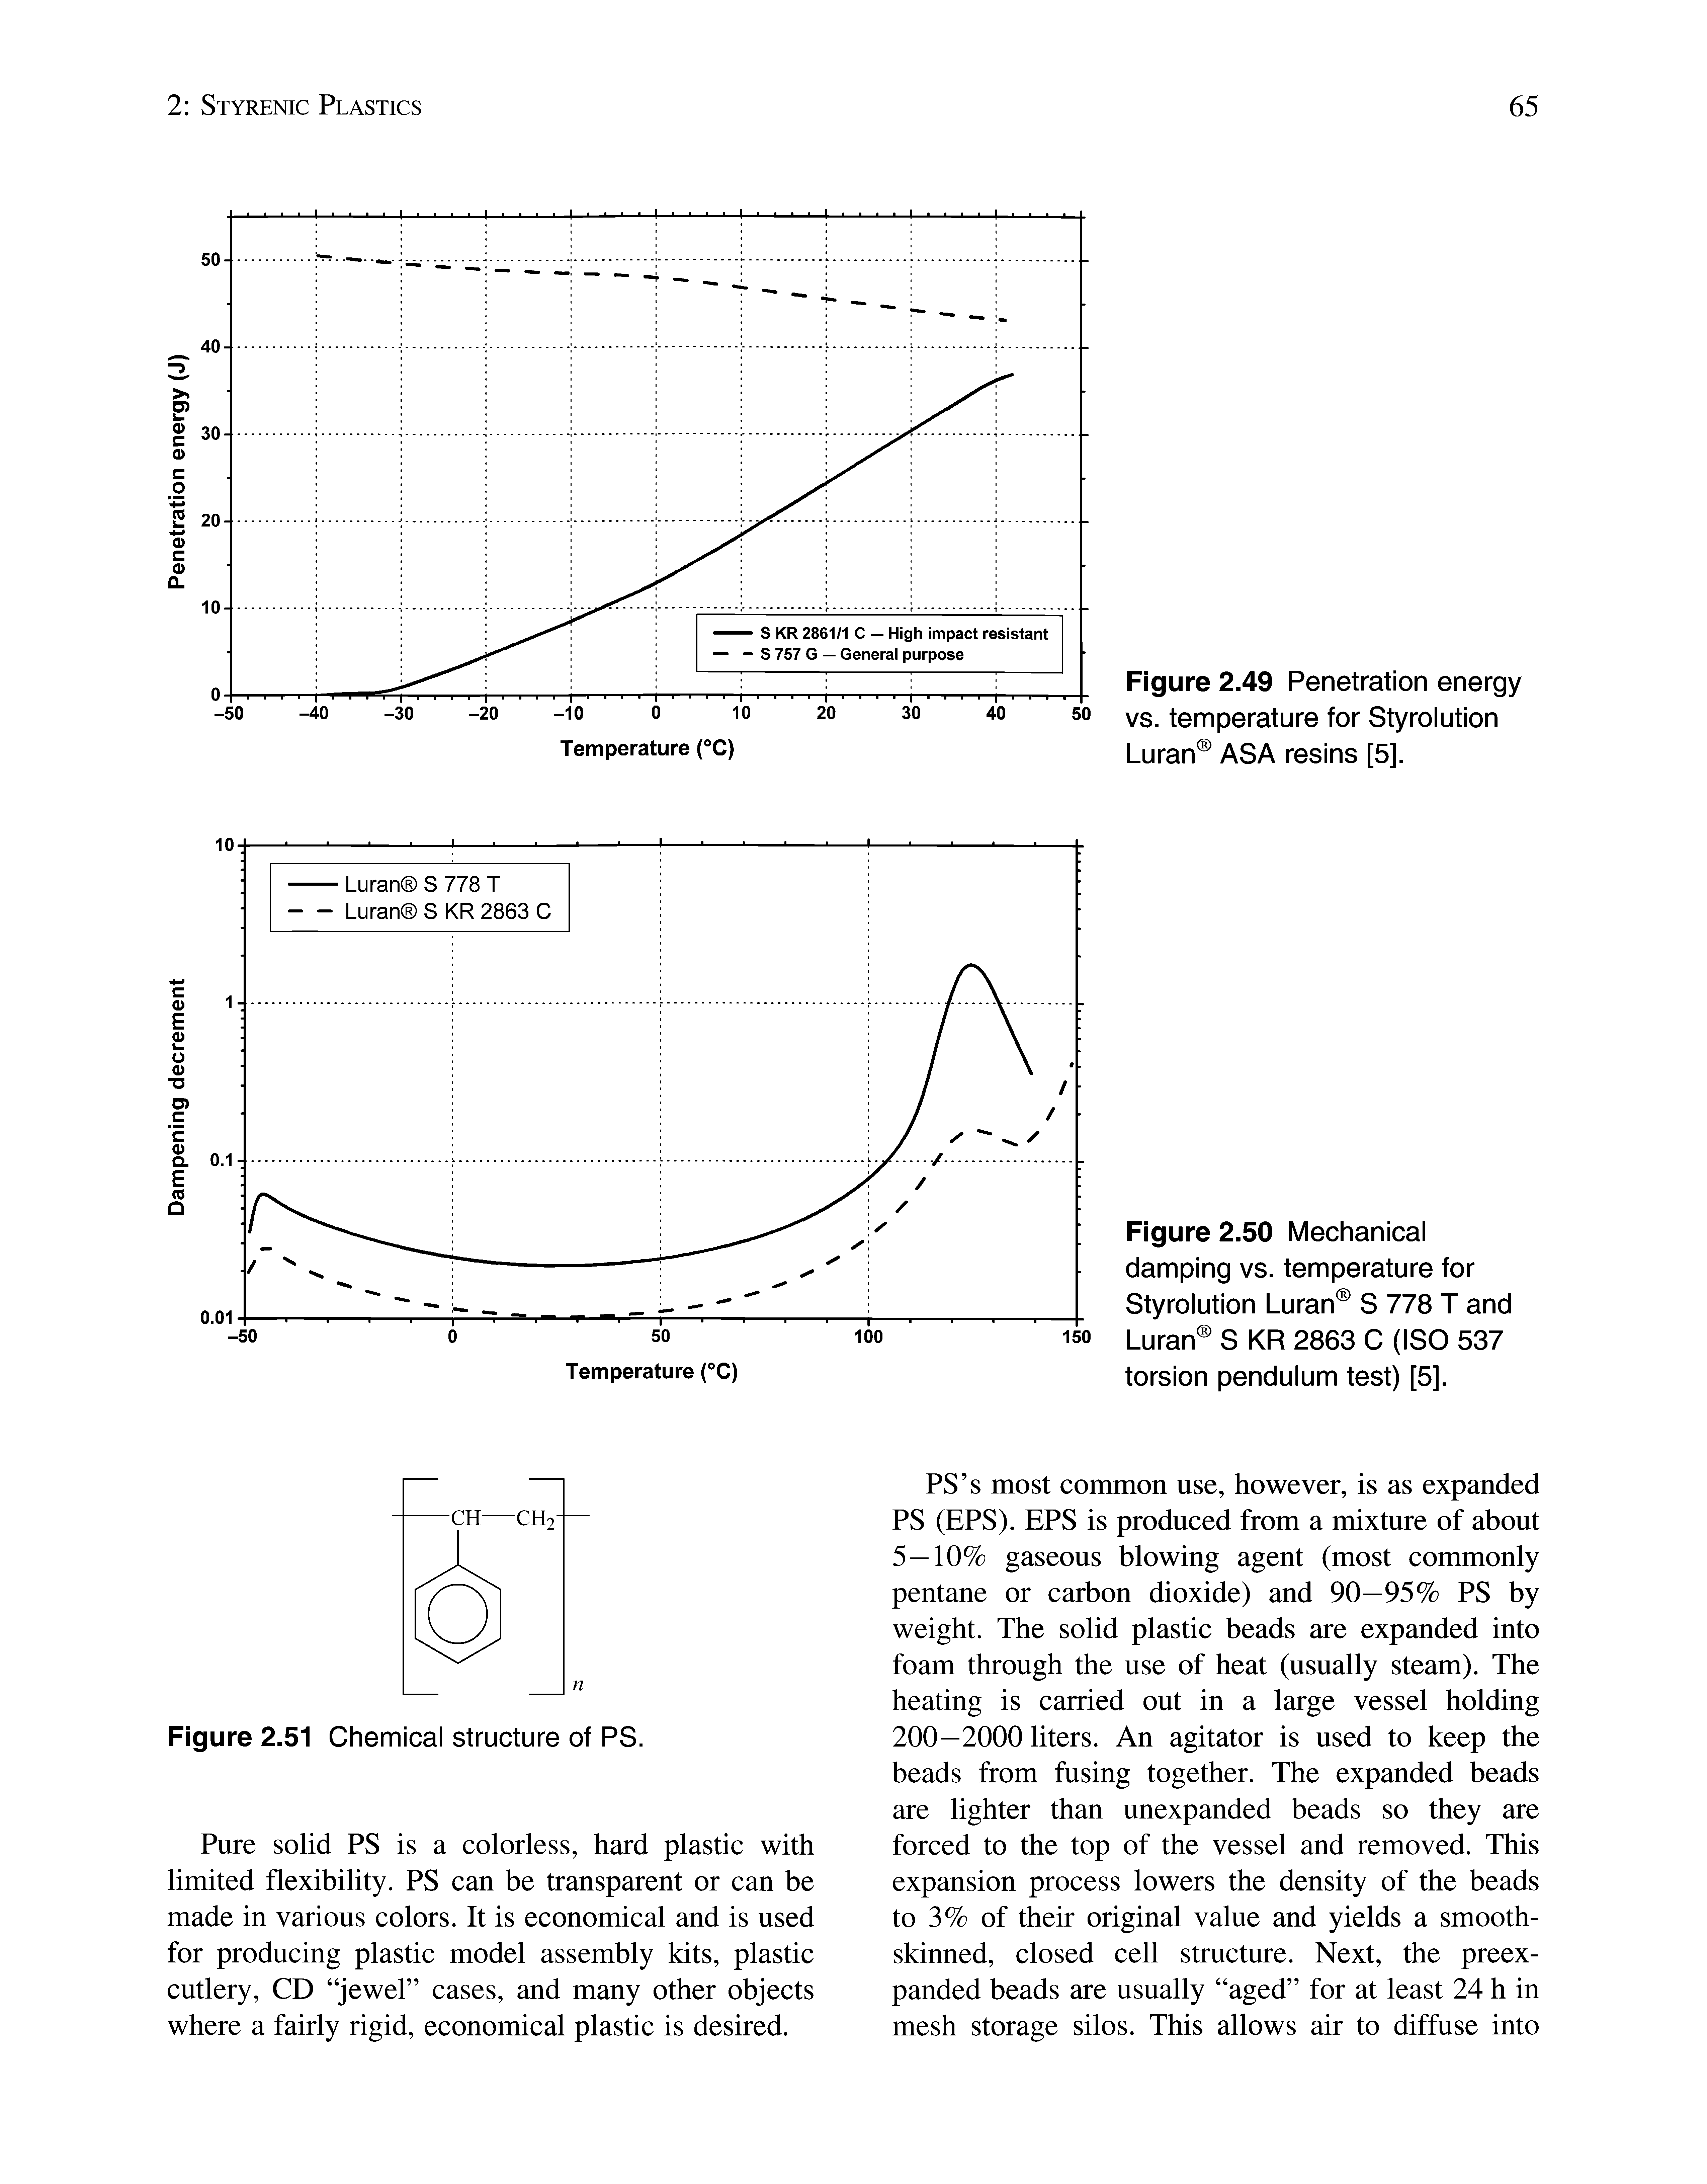 Figure 2.50 Mechanical damping vs. temperature for Styrolution Luran S 778 T and Luran S KR 2863 C (ISO 537 torsion pendulum test) [5].